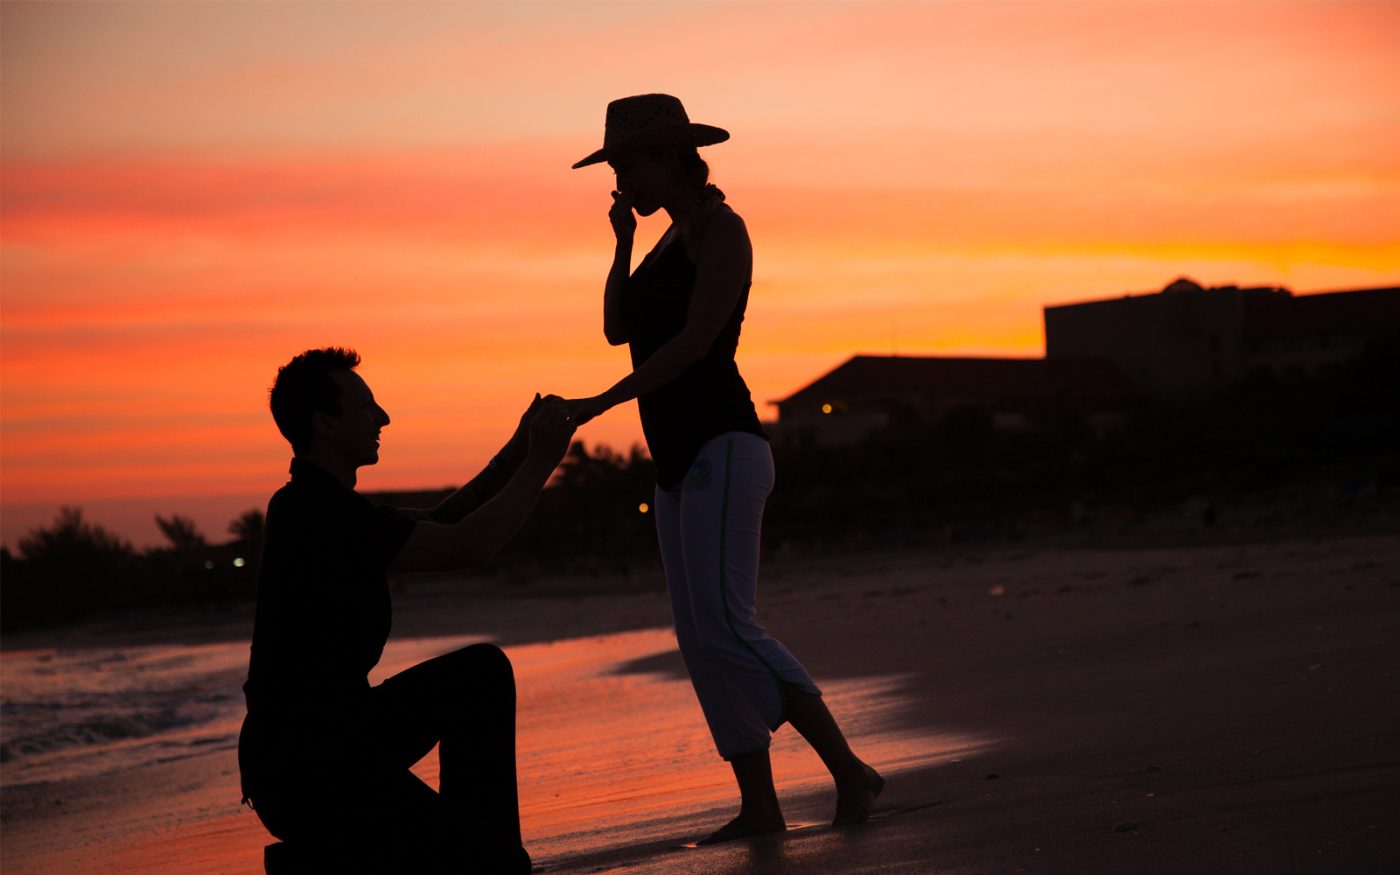 Steve proposing to Erin on one knee on the beach in Cuba